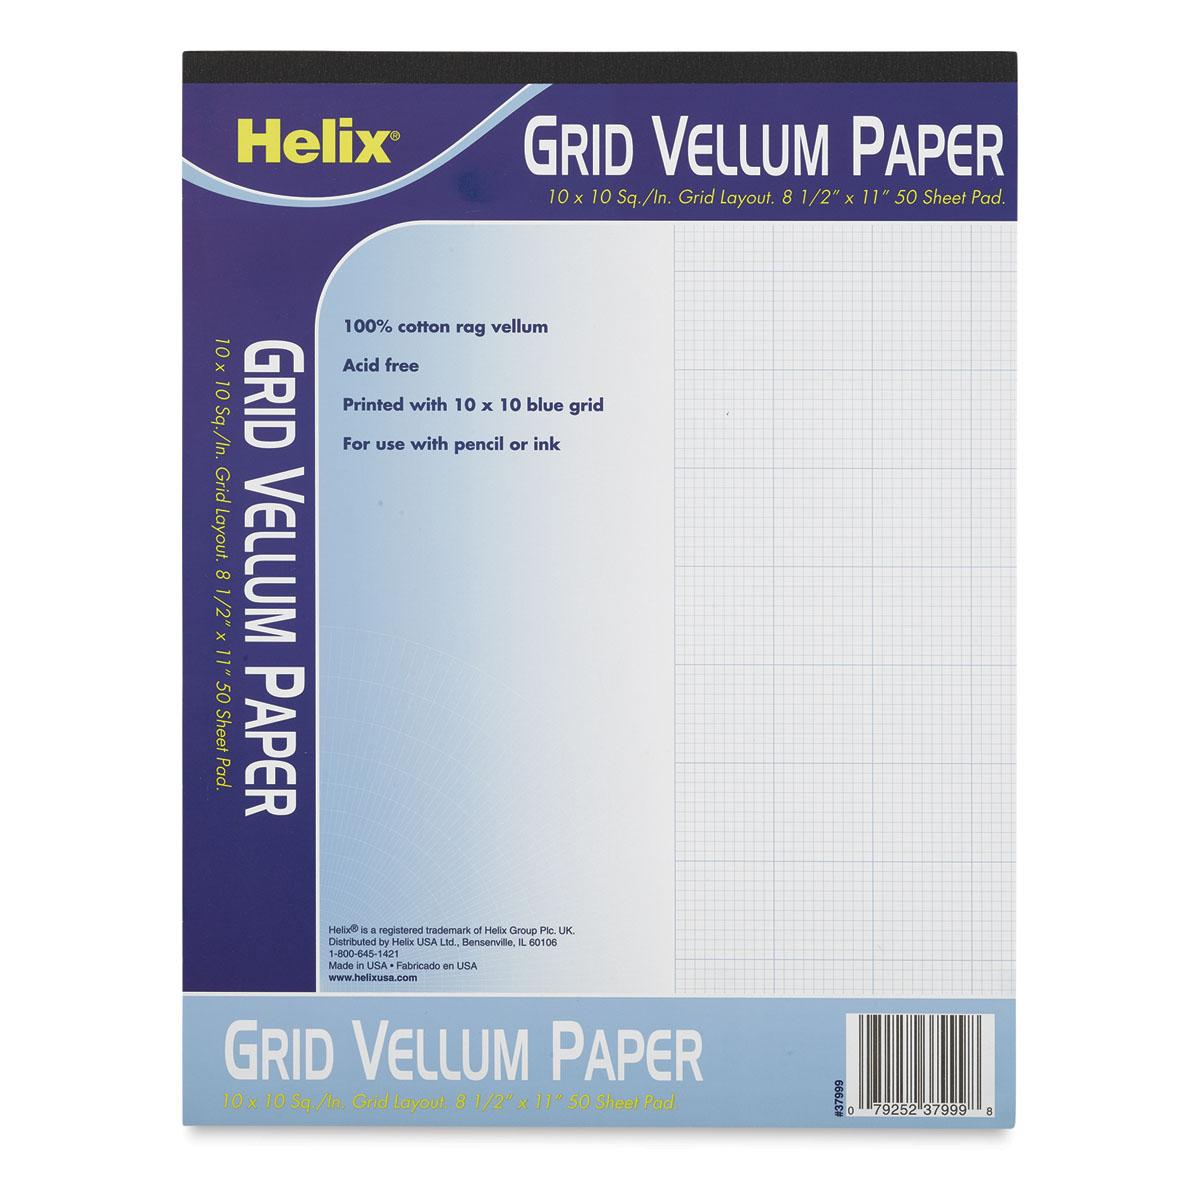 Pacific Arc Professional Cotton Rag Paper Vellum 18 Inch by 20 Yard Roll Gridded 4 x 4 White